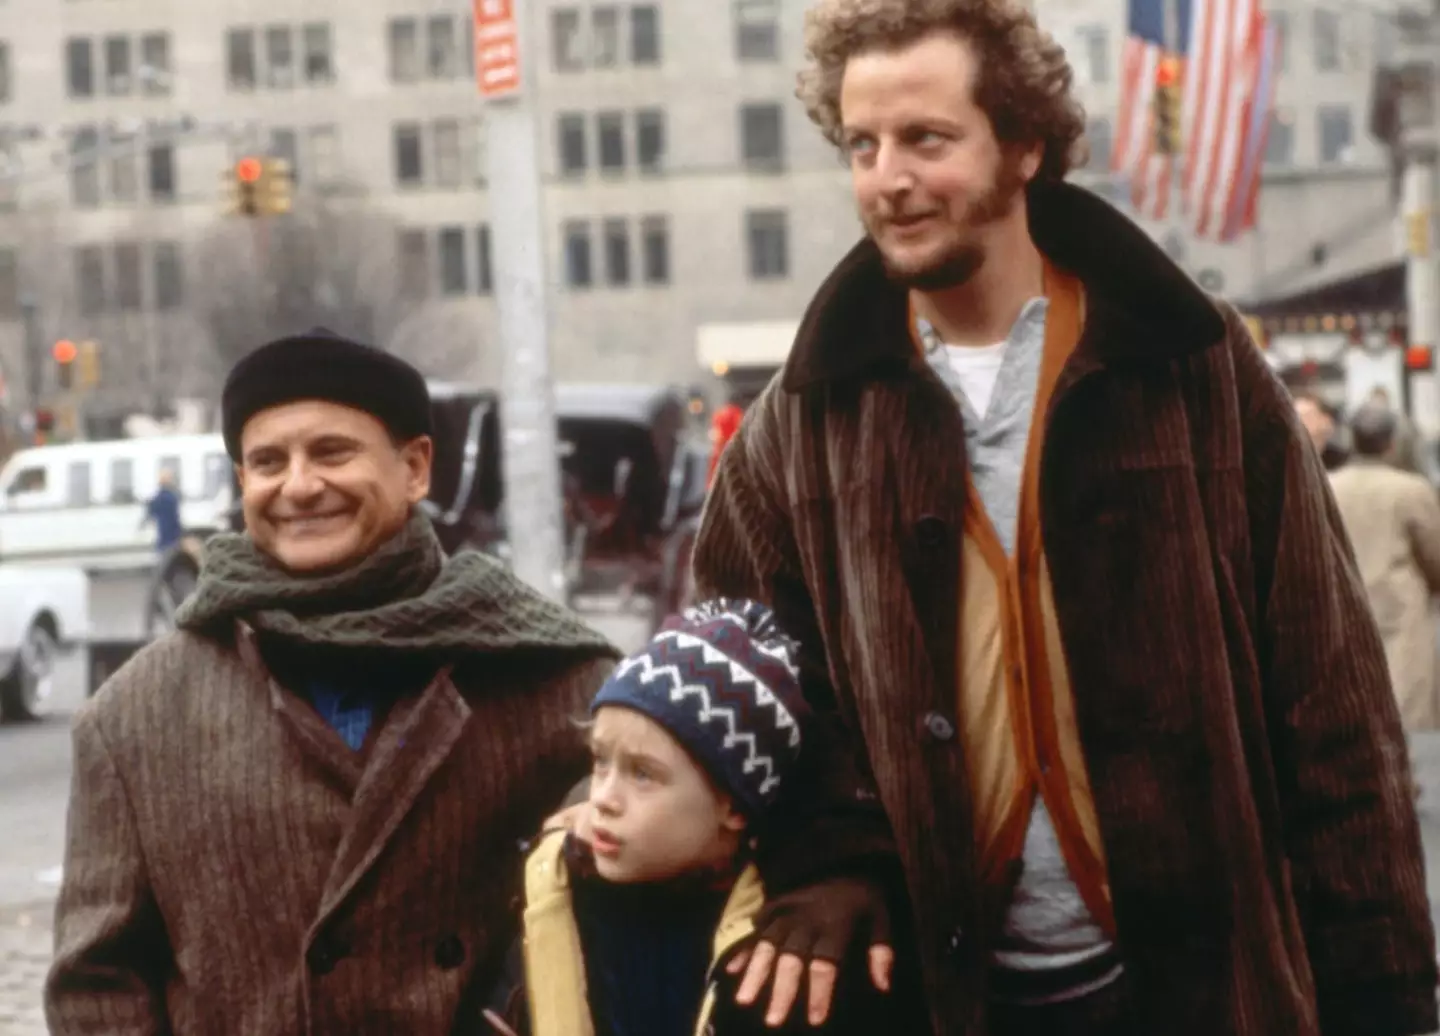 Joe Pesci’s Harry and Daniel Stern’s Marv’s show just how brilliant they are at physical comedy.